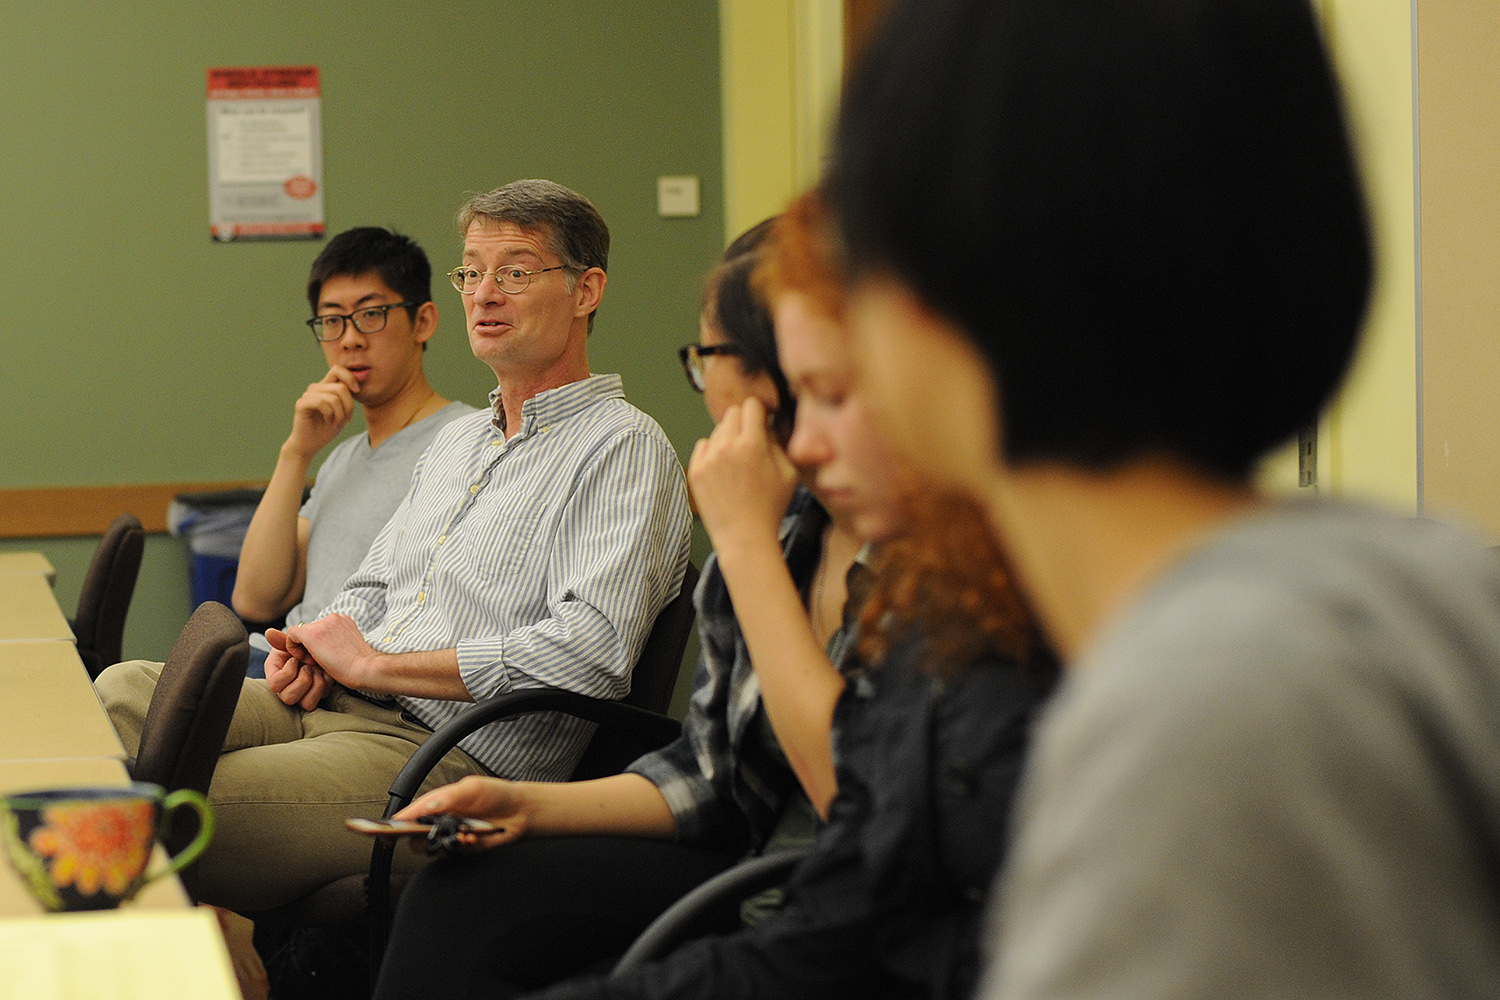 The breakout sessions were discussed in English, Chinese, Japanese and Korean.